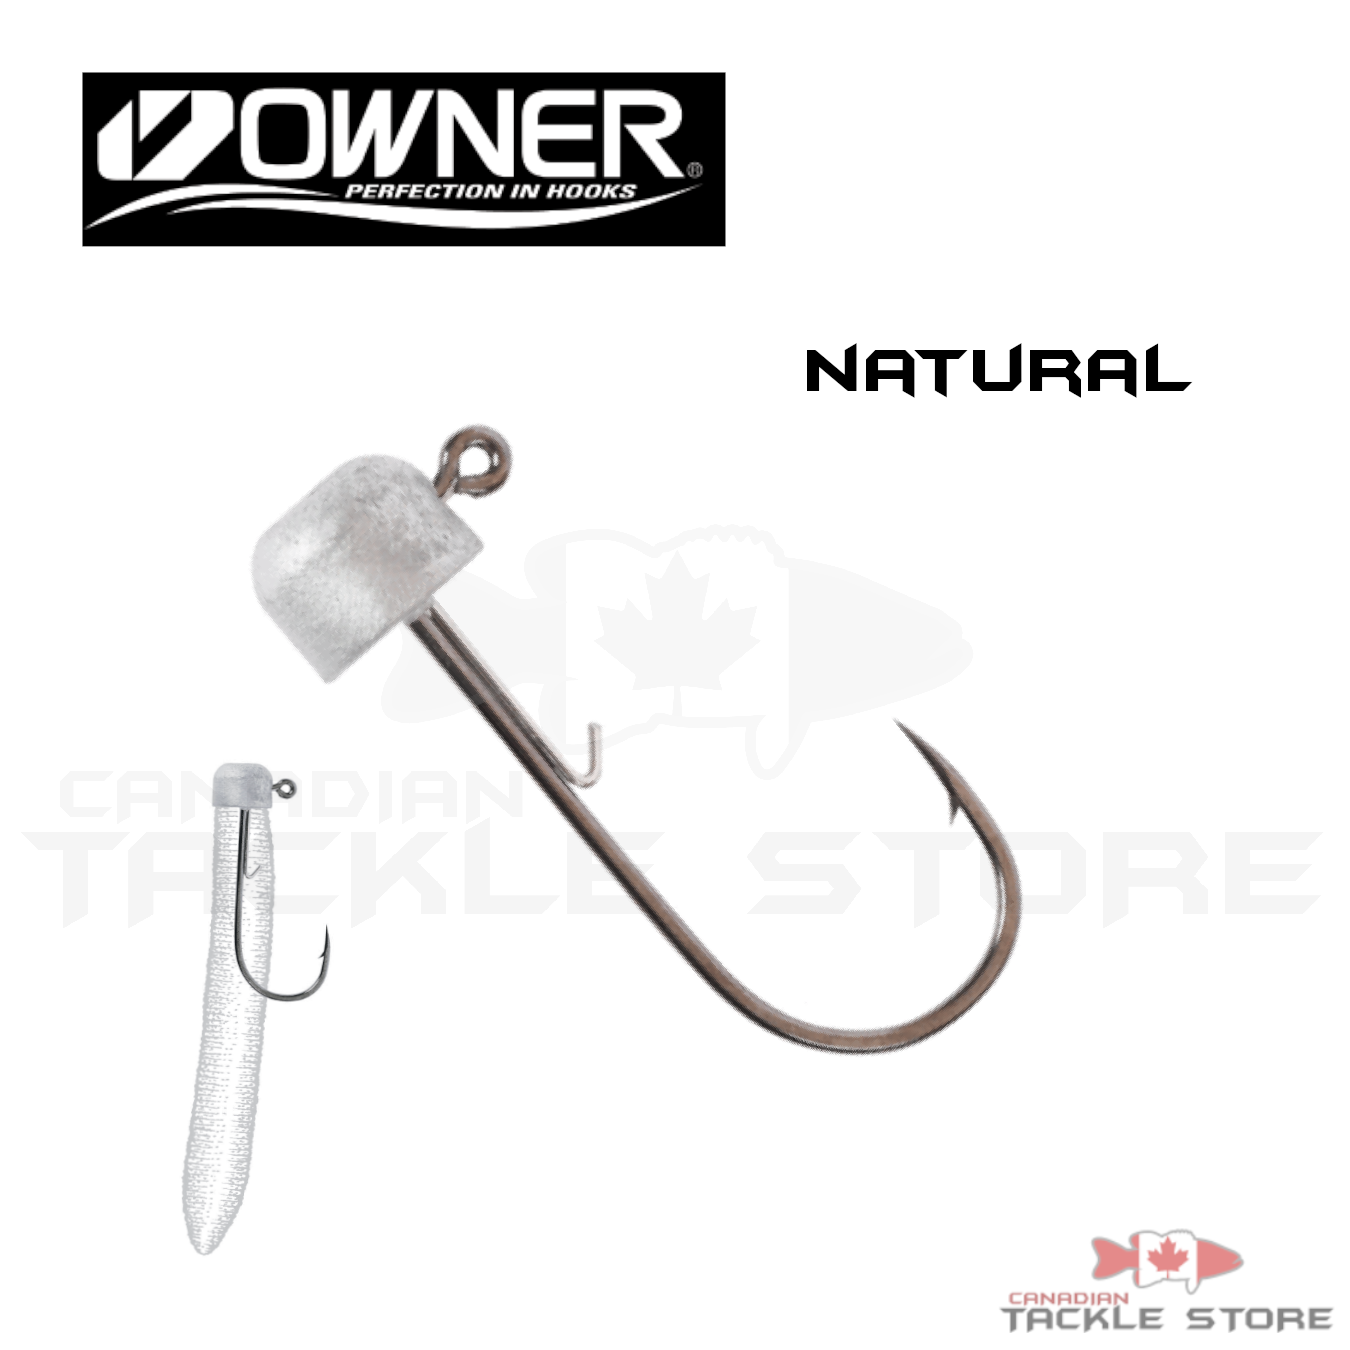 Owner Block Head Jig – Canadian Tackle Store